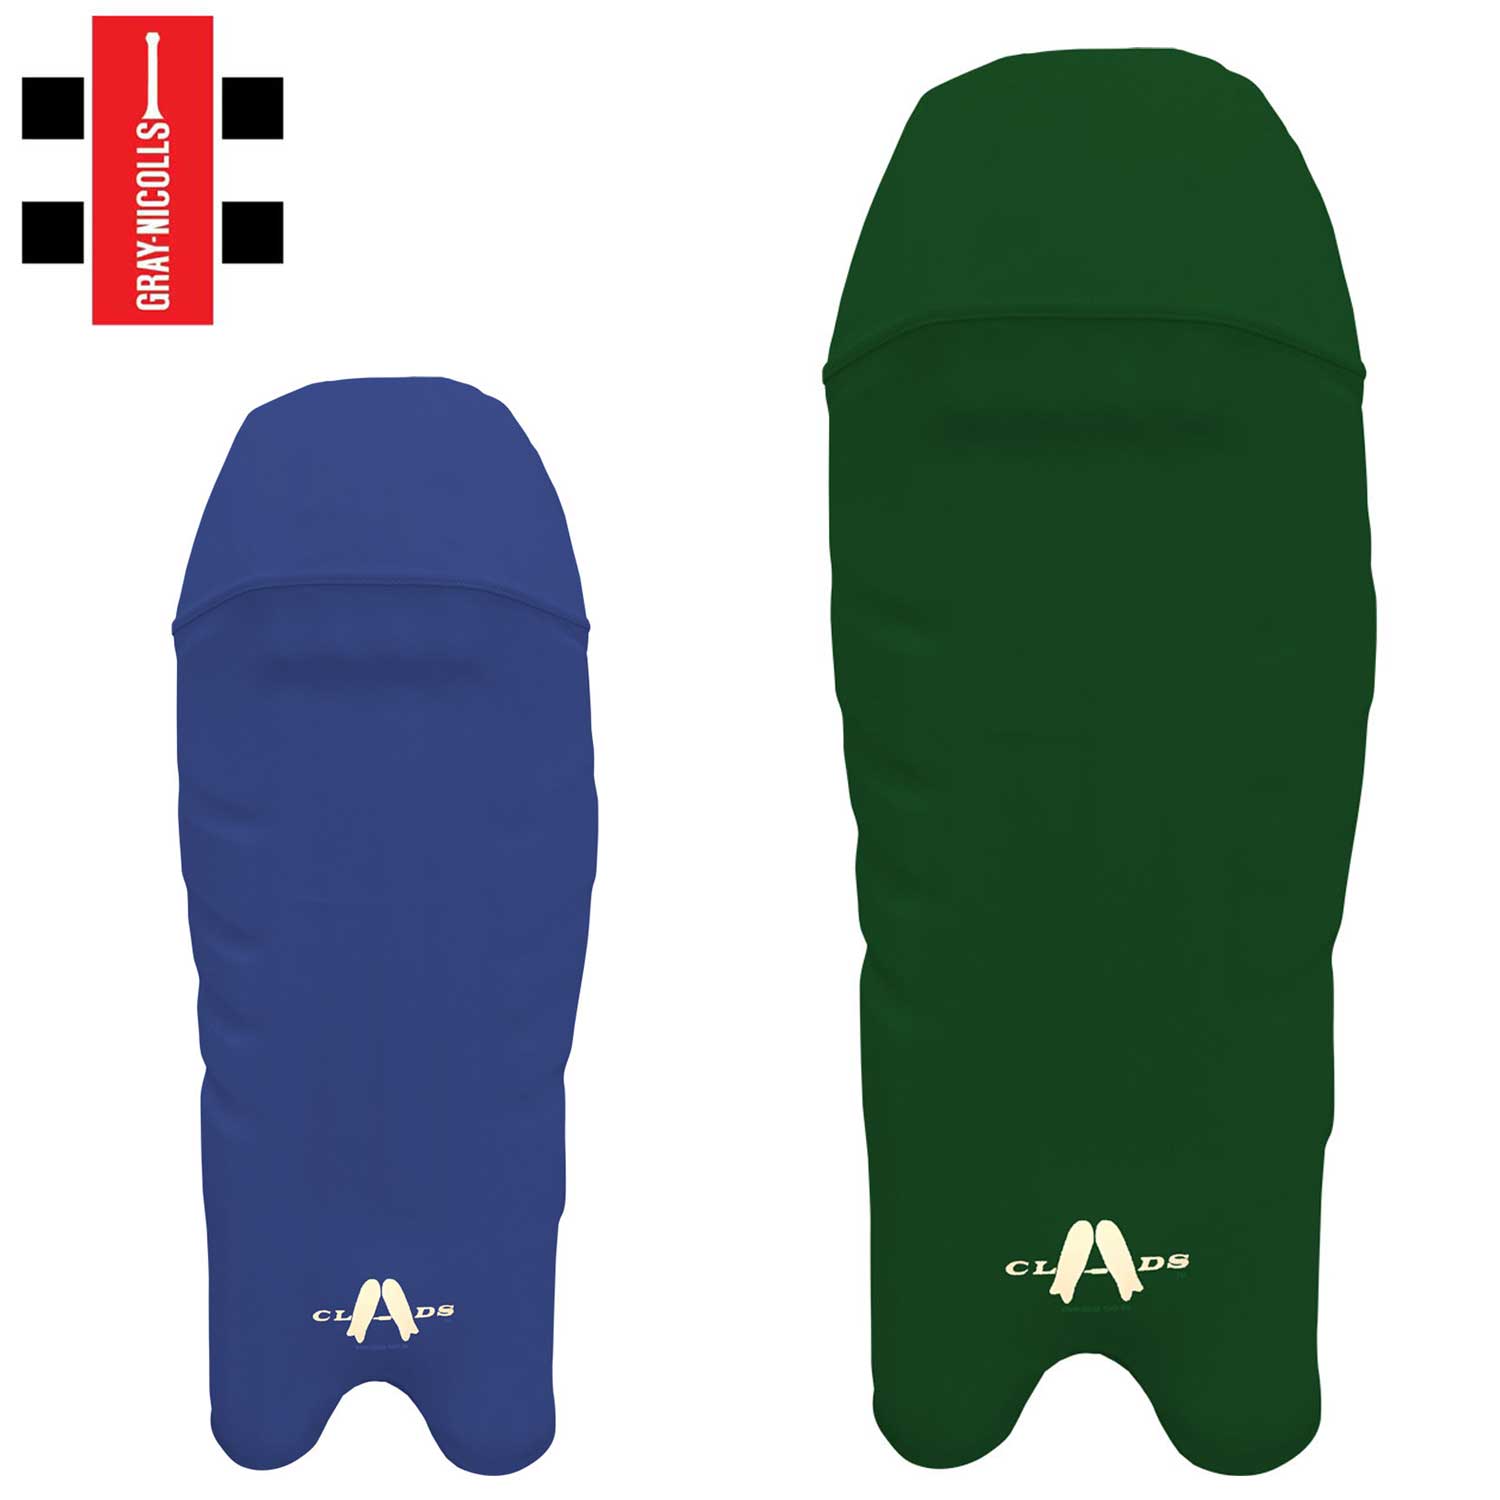 Clads - Cricket Wicket Keeping Pad Covers